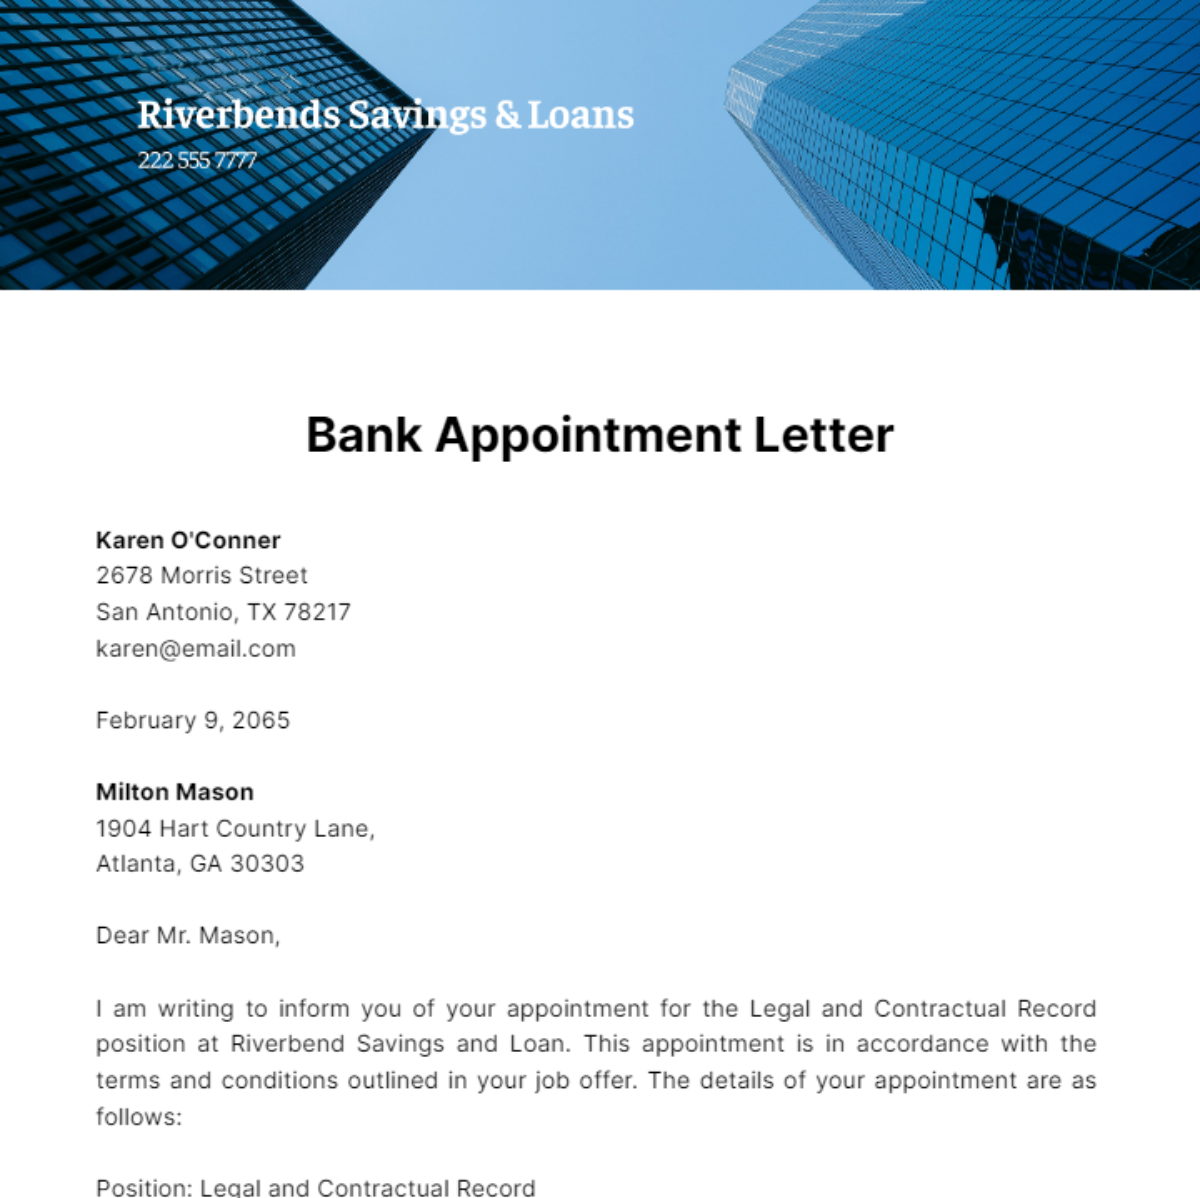 Bank Appointment Letter Template